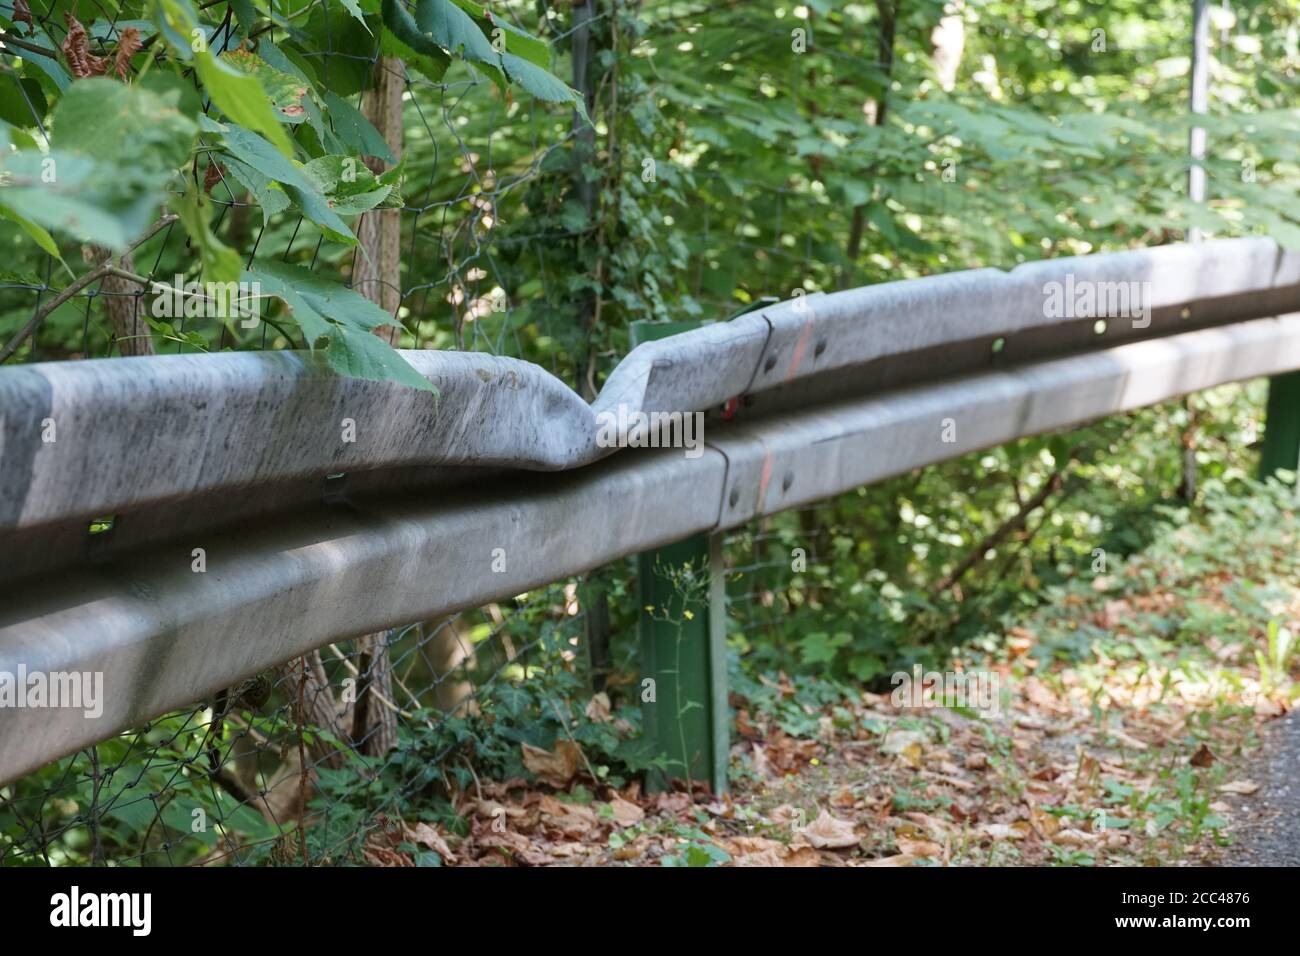 Metal crash barriers or guard rails damaged due to a collision with a vehicle. The barriers line the secondary road in the hills above city Freiburg. Stock Photo